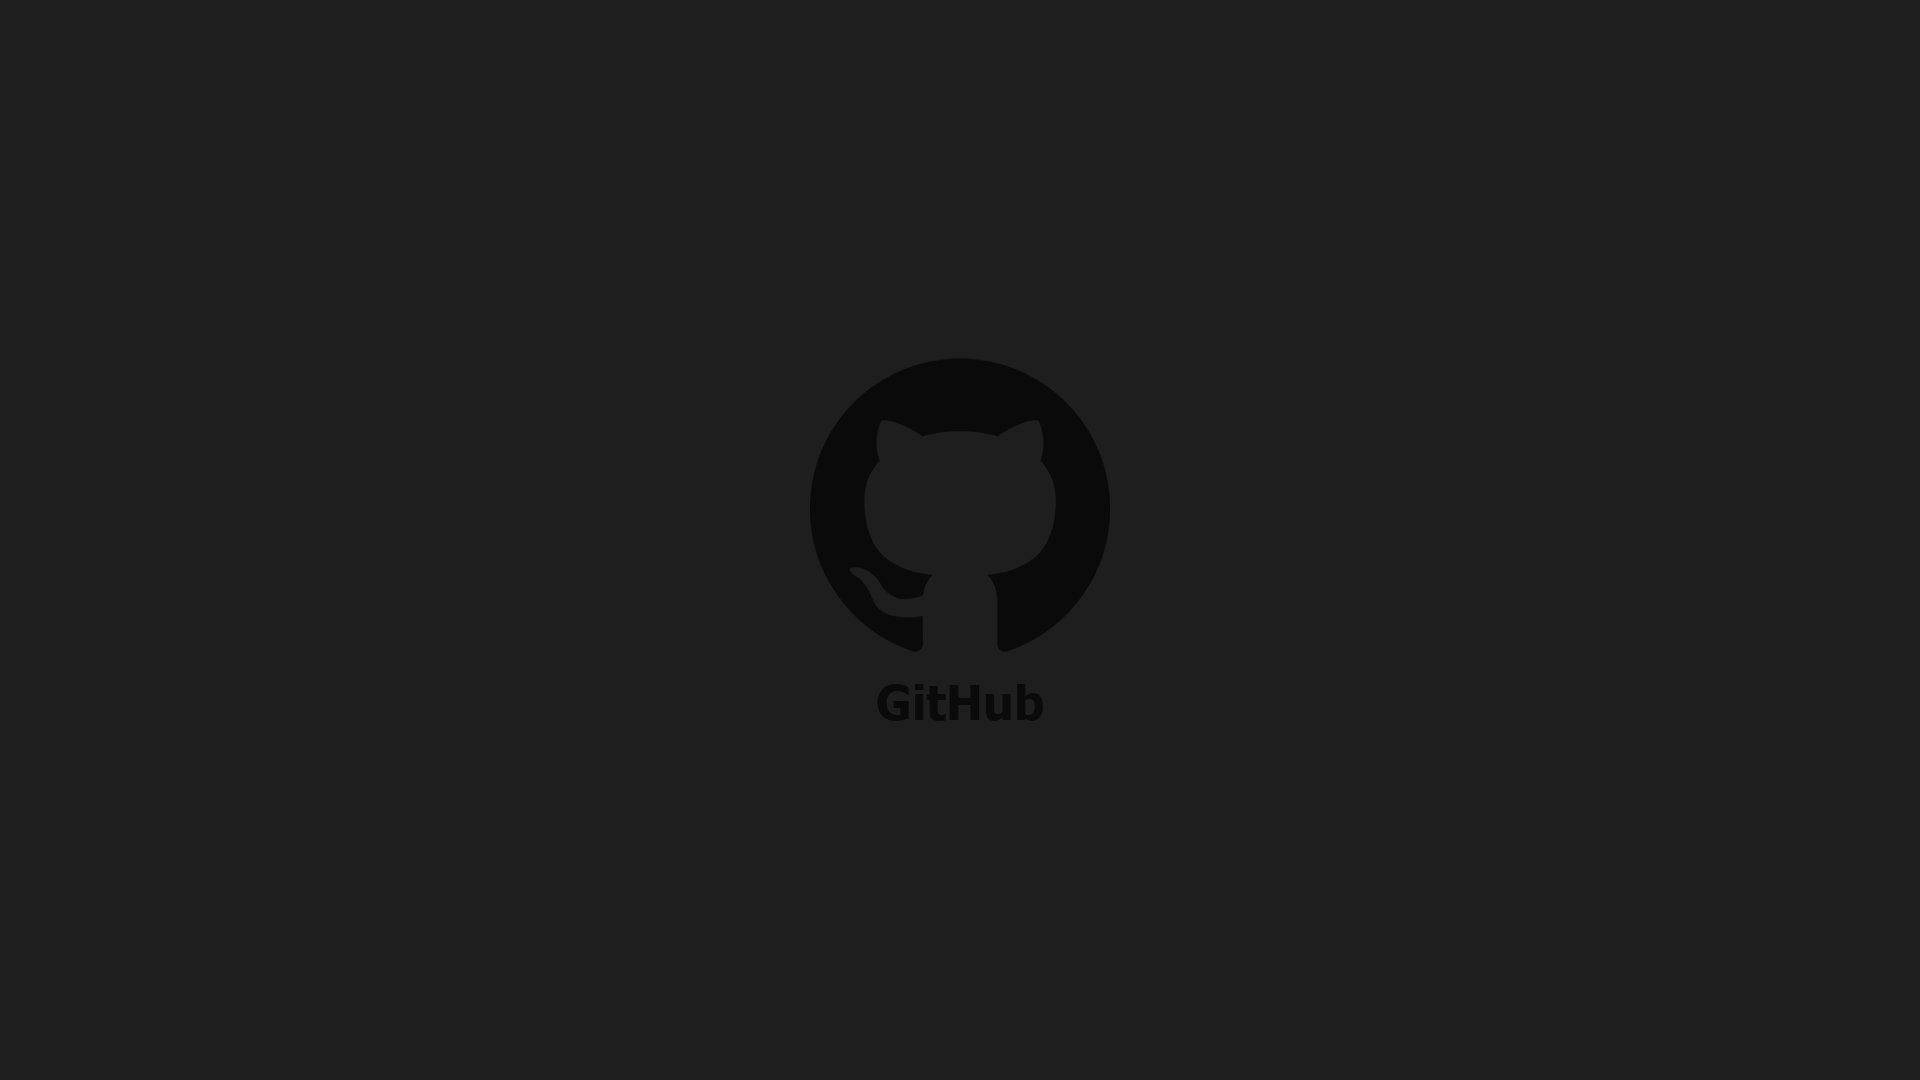 1920X1080 Github Wallpaper and Background